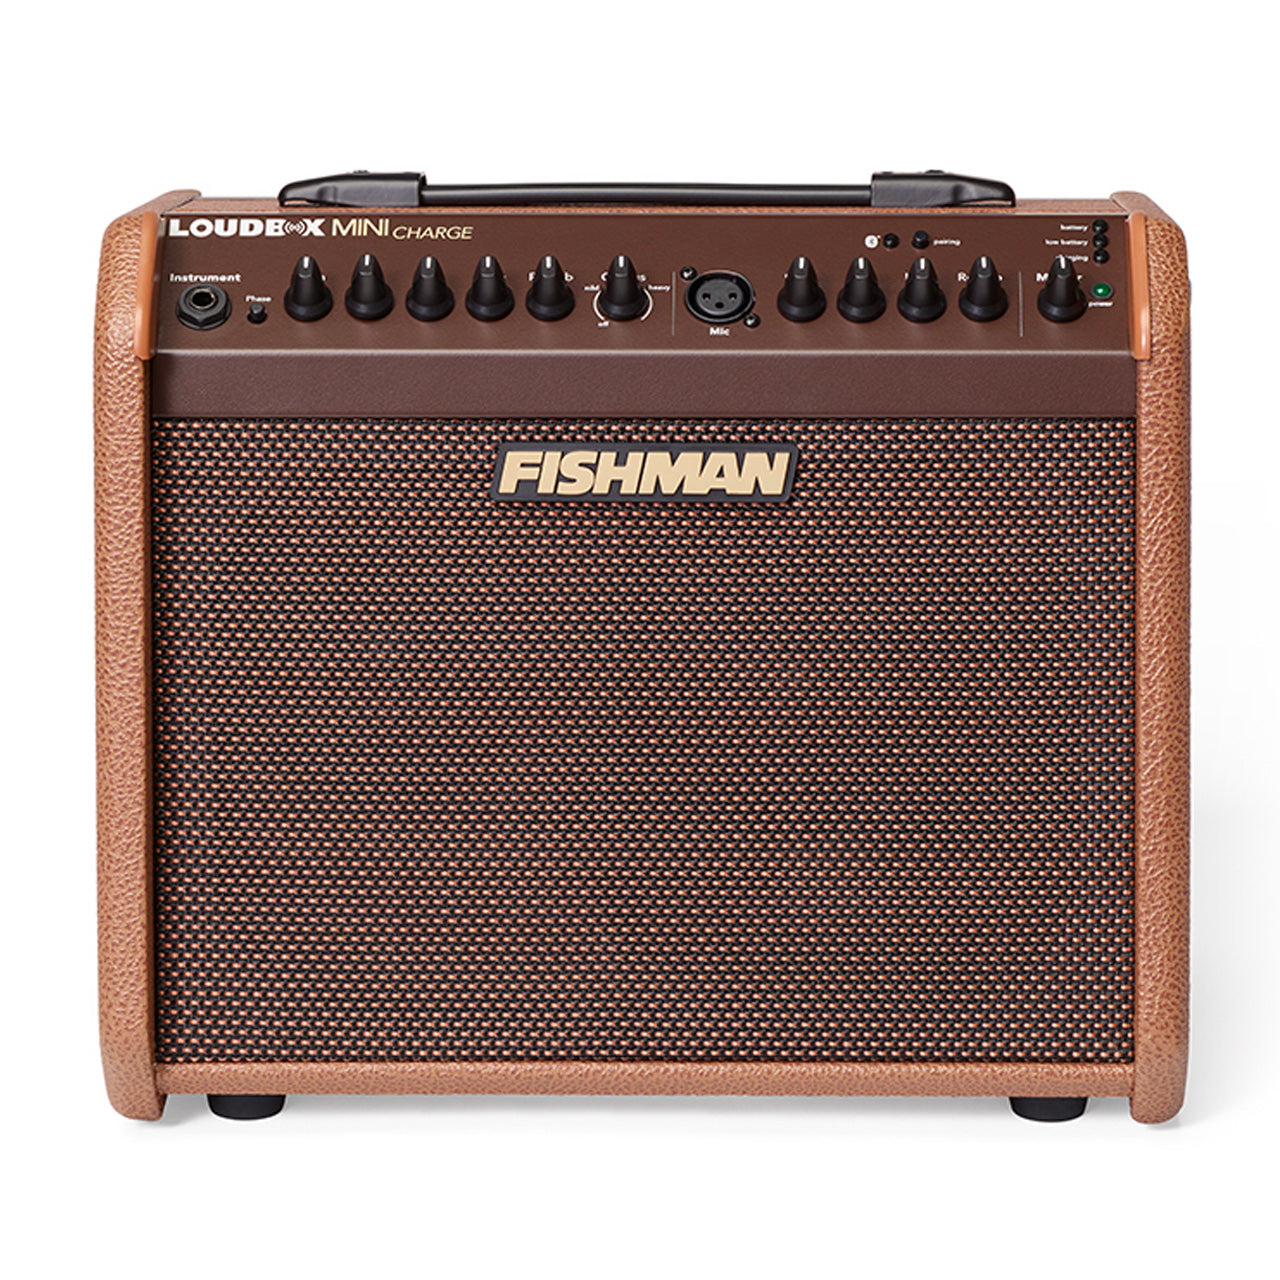 Fishman Loudbox Mini Charge Battery-Powered Acoustic Instrument Amplifier, front